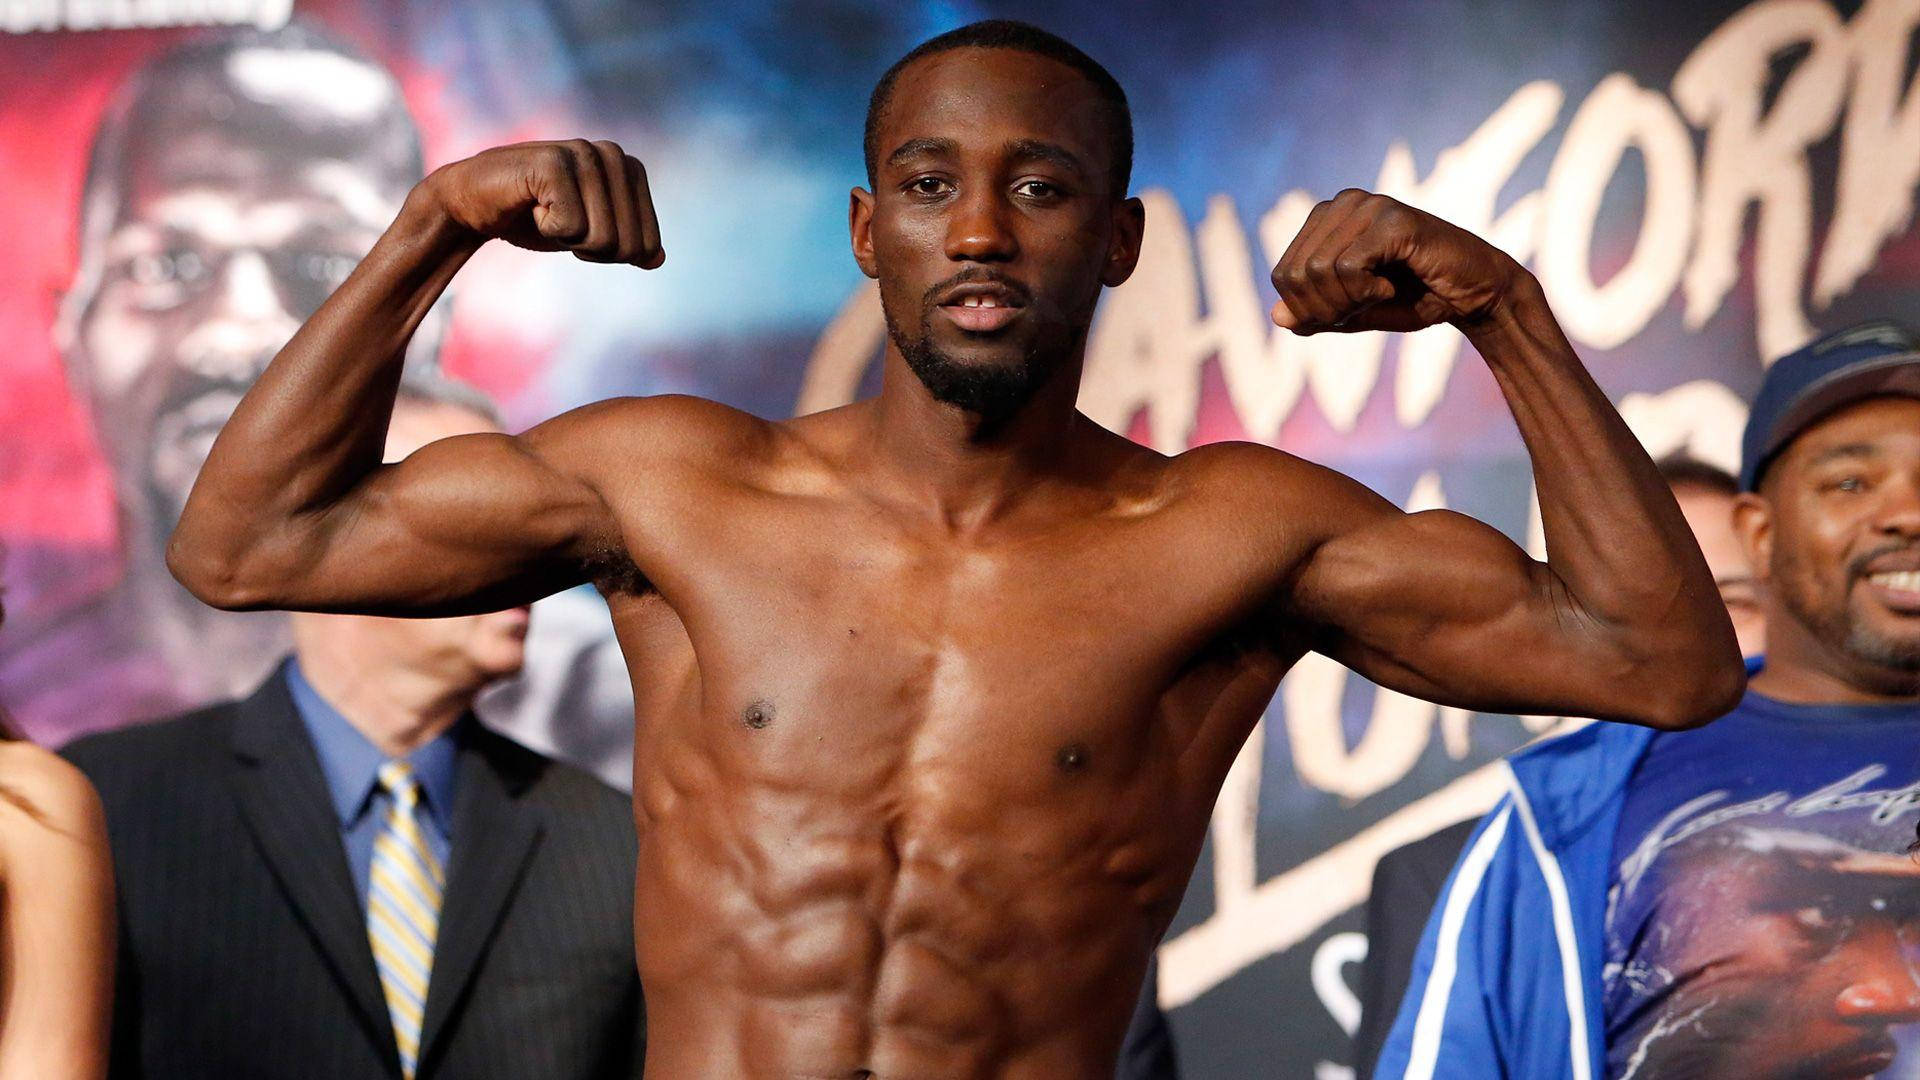 Terence Crawford Strong Arms Wallpaper